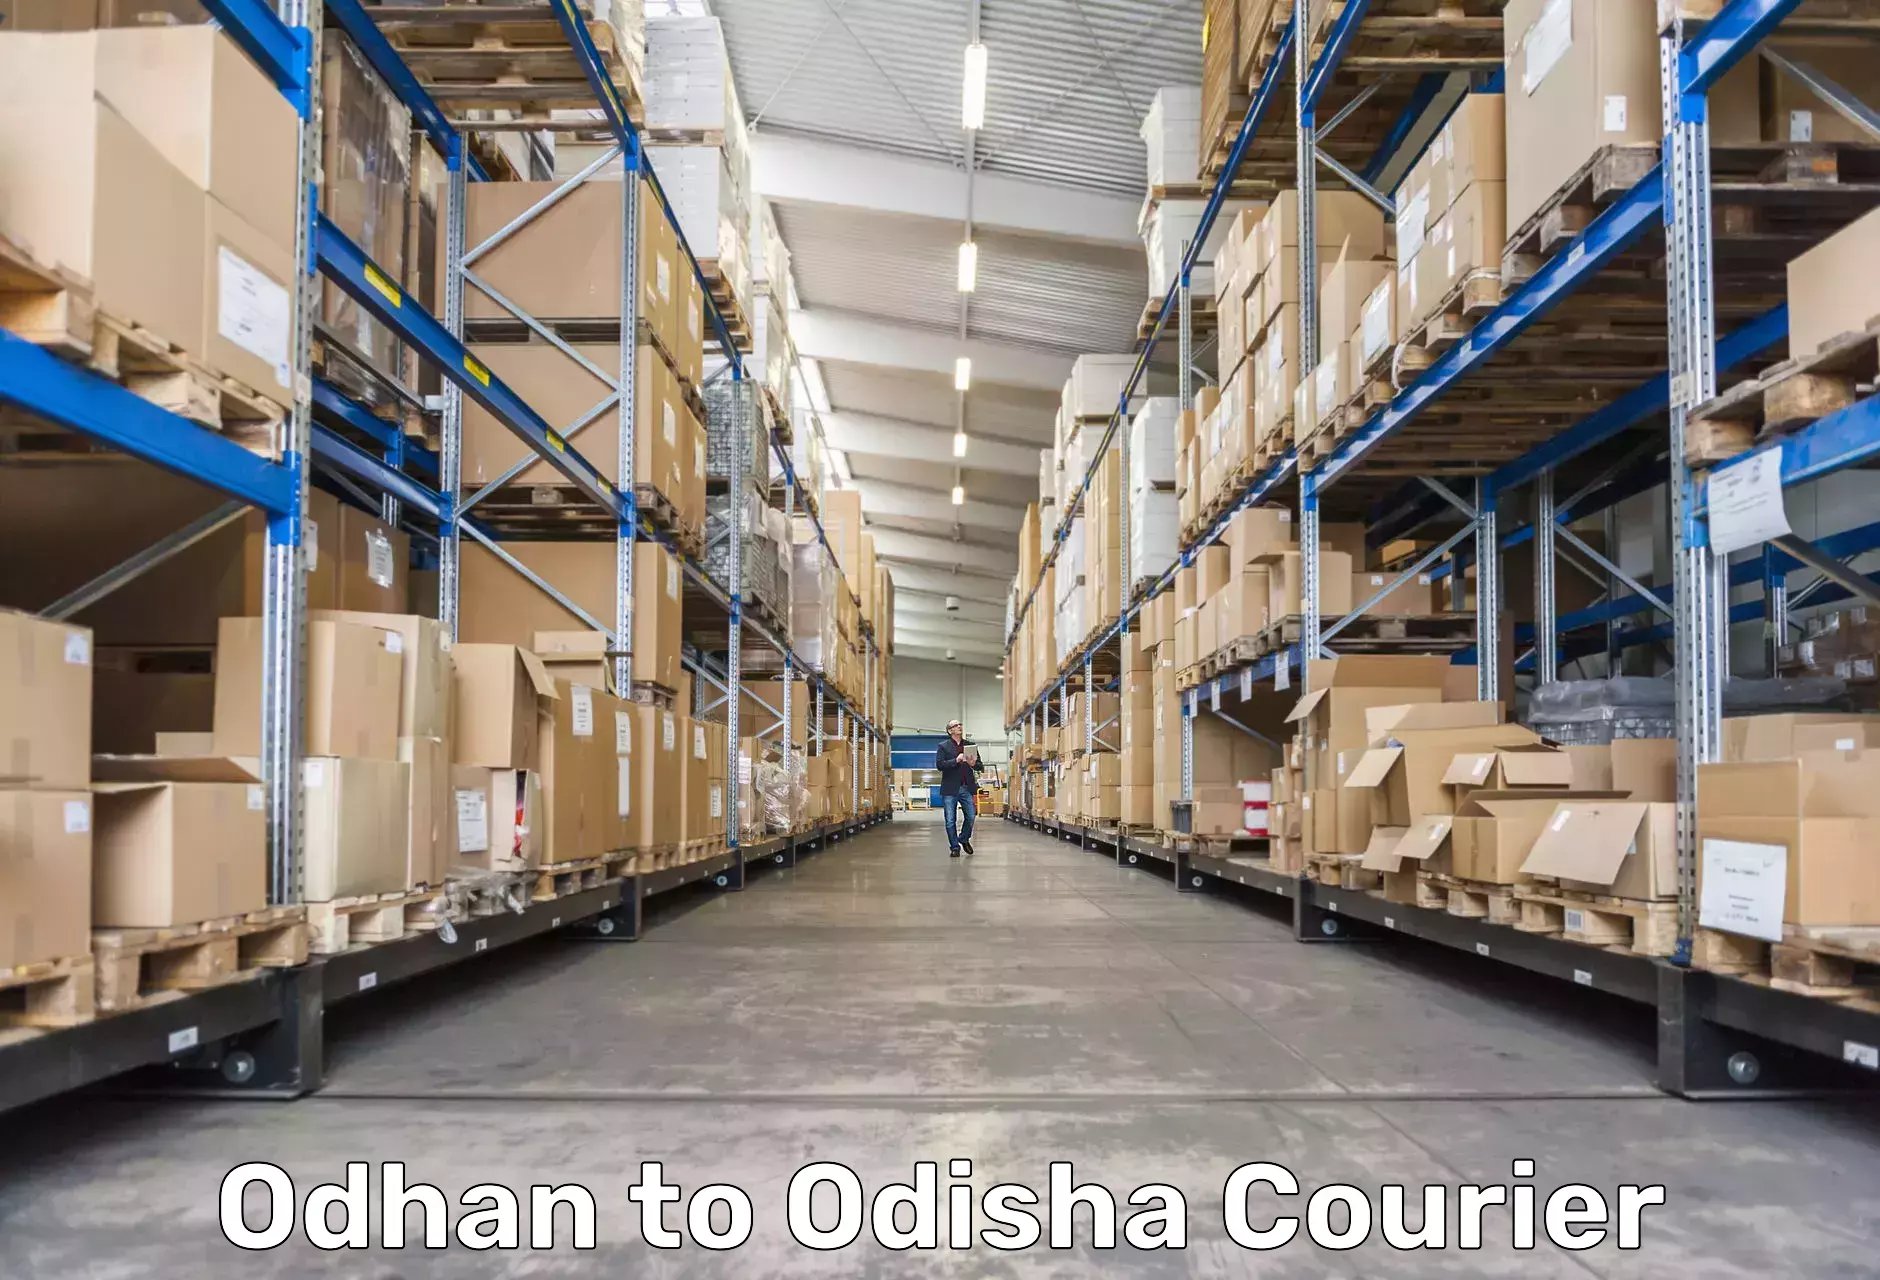 Expedited parcel delivery Odhan to Dukura